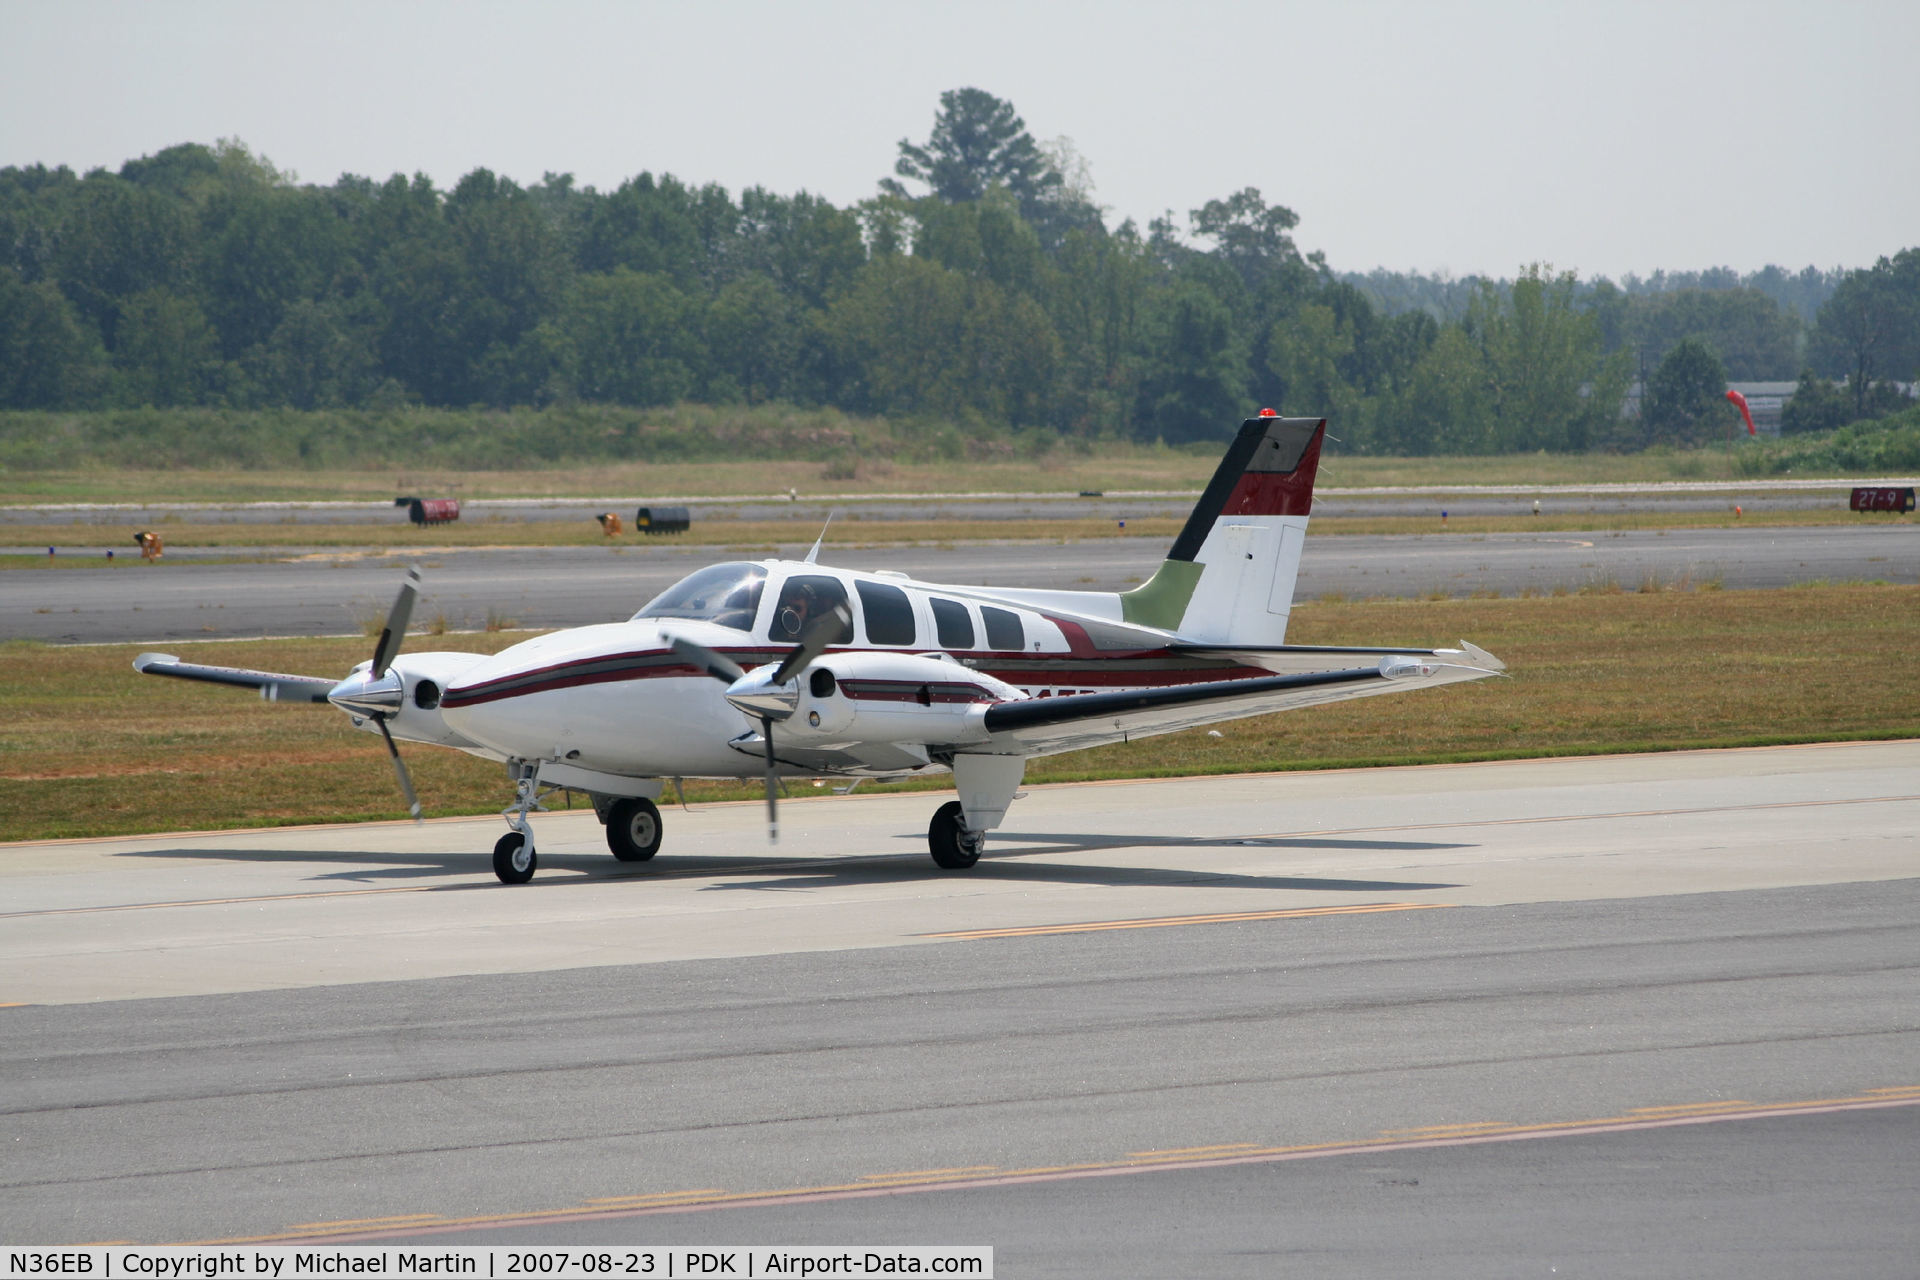 N36EB, 1984 Beech 58P Baron C/N TJ-465, Taxing to Epps Air Service